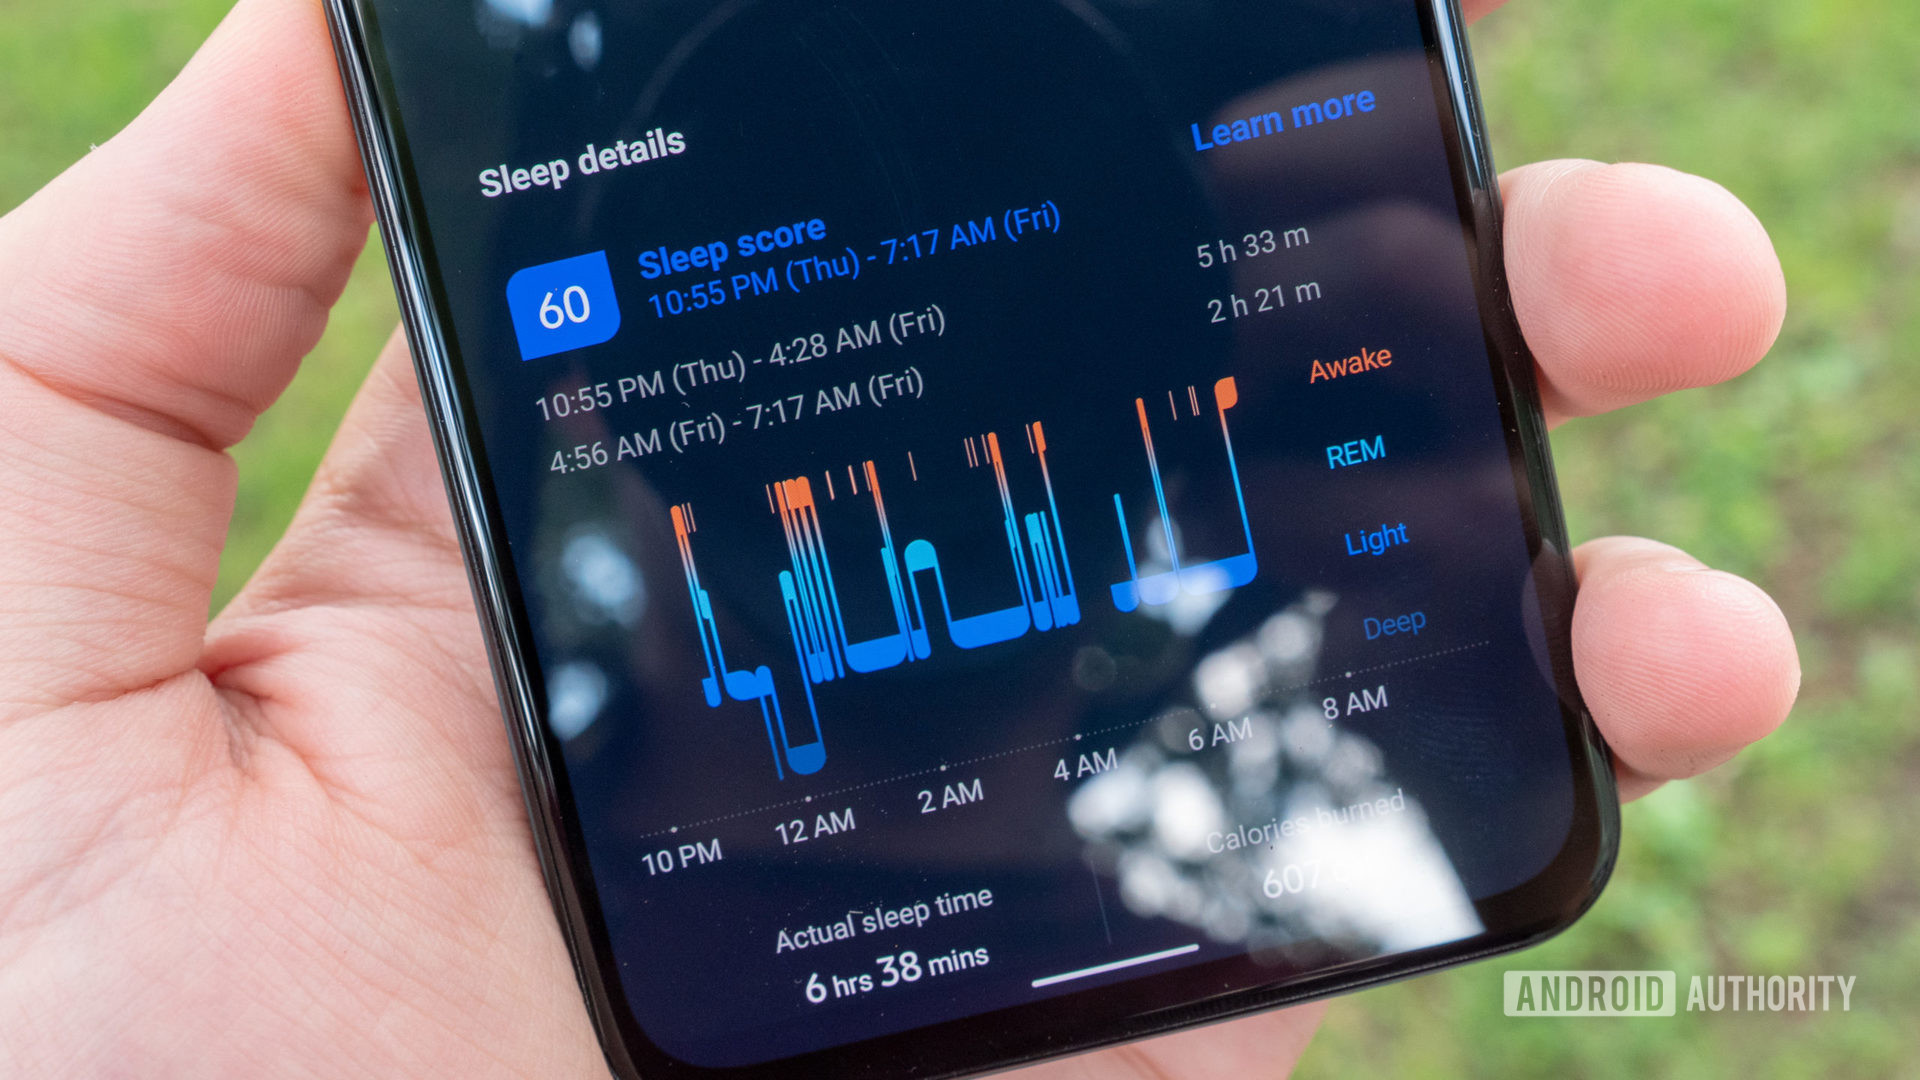 The Samsung Health app showing sleep stages from the Samsung Galaxy Watch 4.